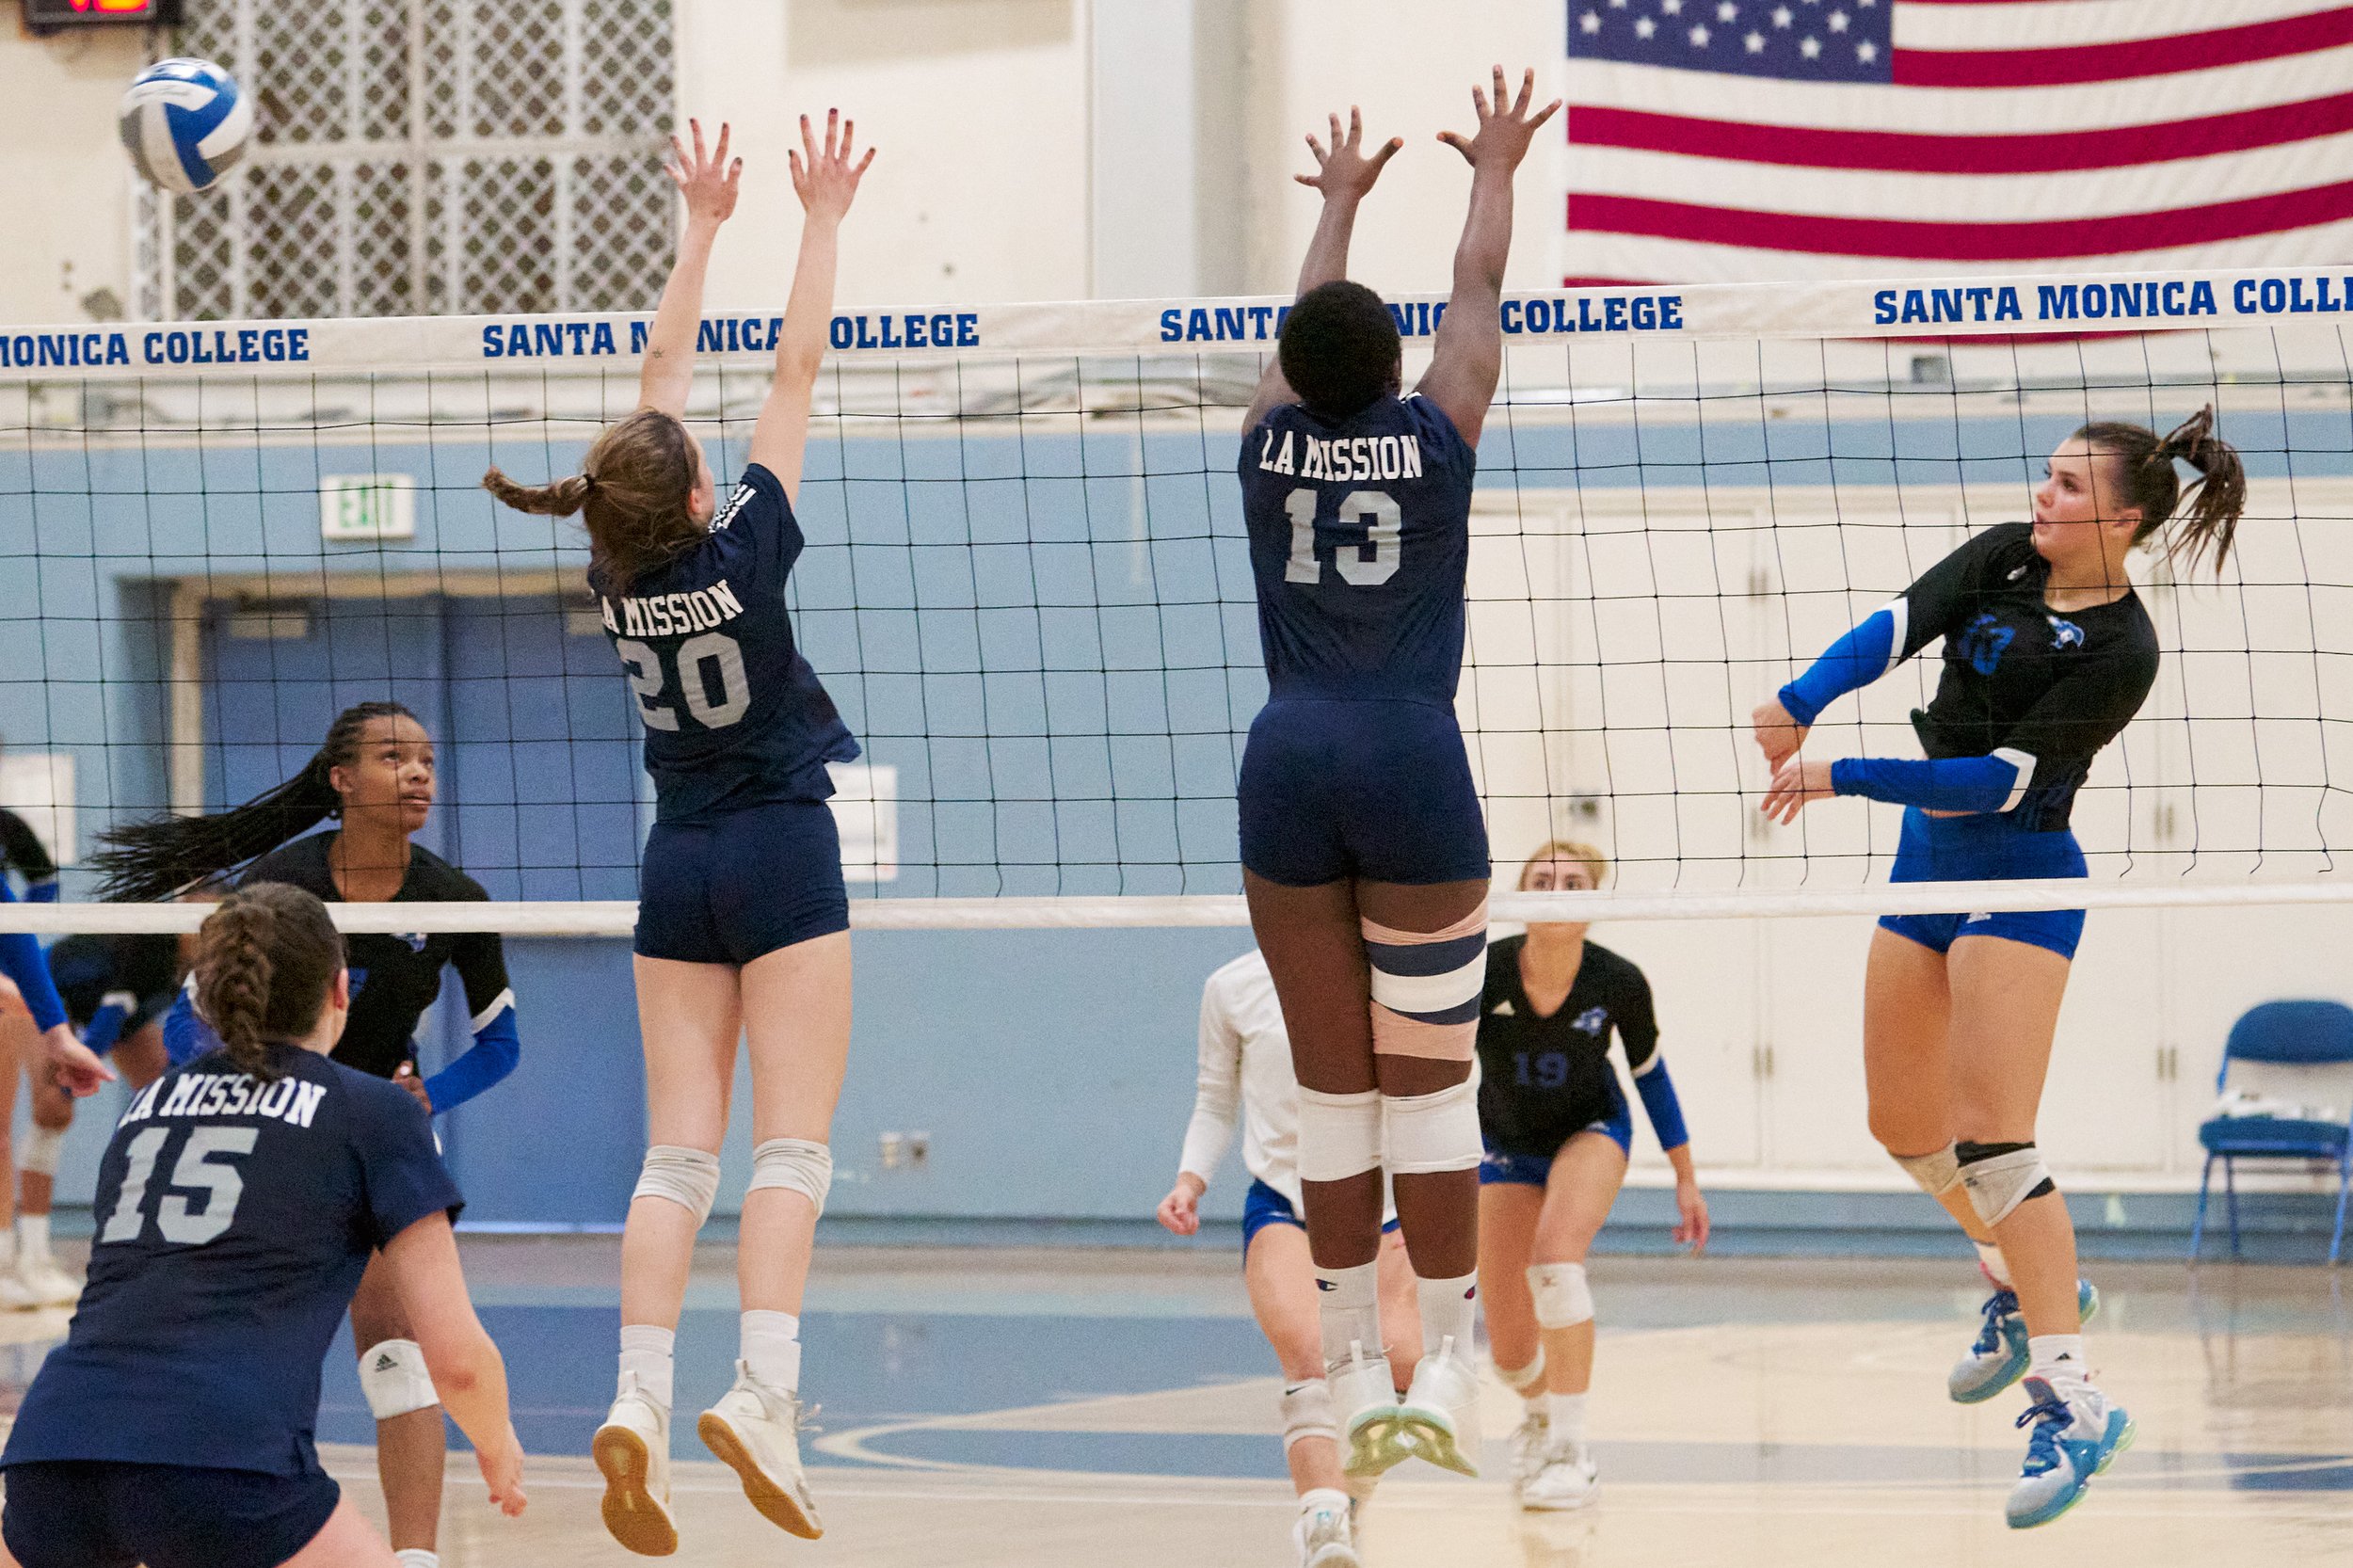  Santa Monica College Corsairs' Mackenzie Wolff (right) and Zarha Stanton (left), and Los Angeles Mission College Eagles' McKenna Keil (20) and Oluwatoyin Sunday (13) during the women's volleyball match on Friday, October 7, 2022, at the Corsair Gym 